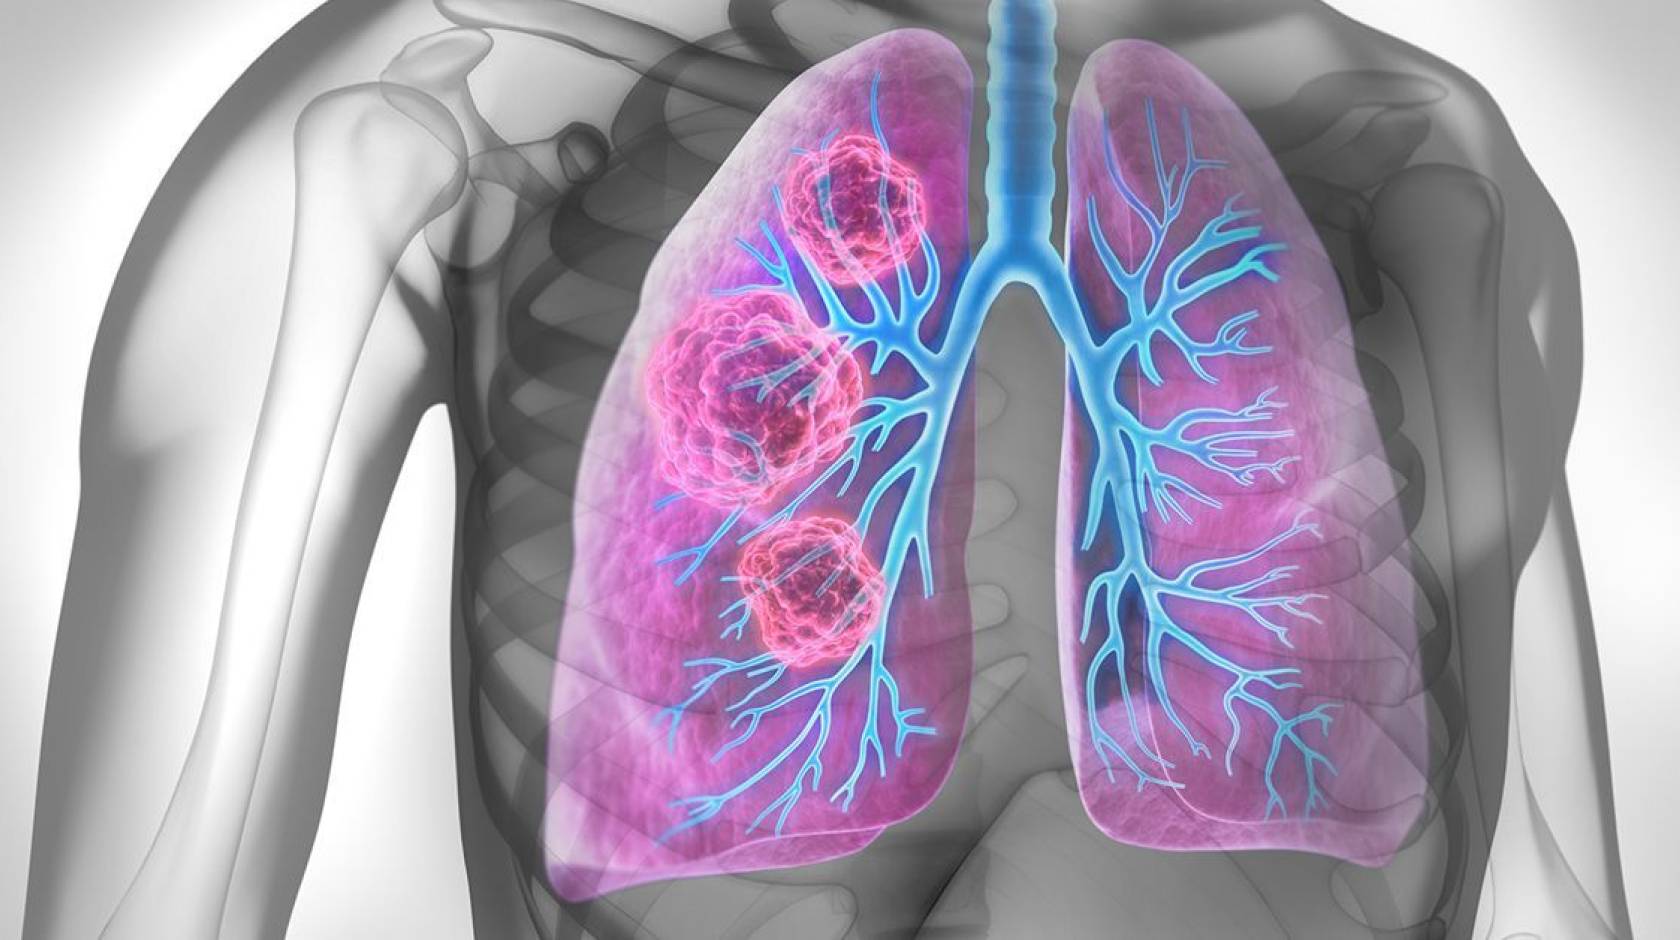 Visualization that looks like an X-ray with pink and blue lungs